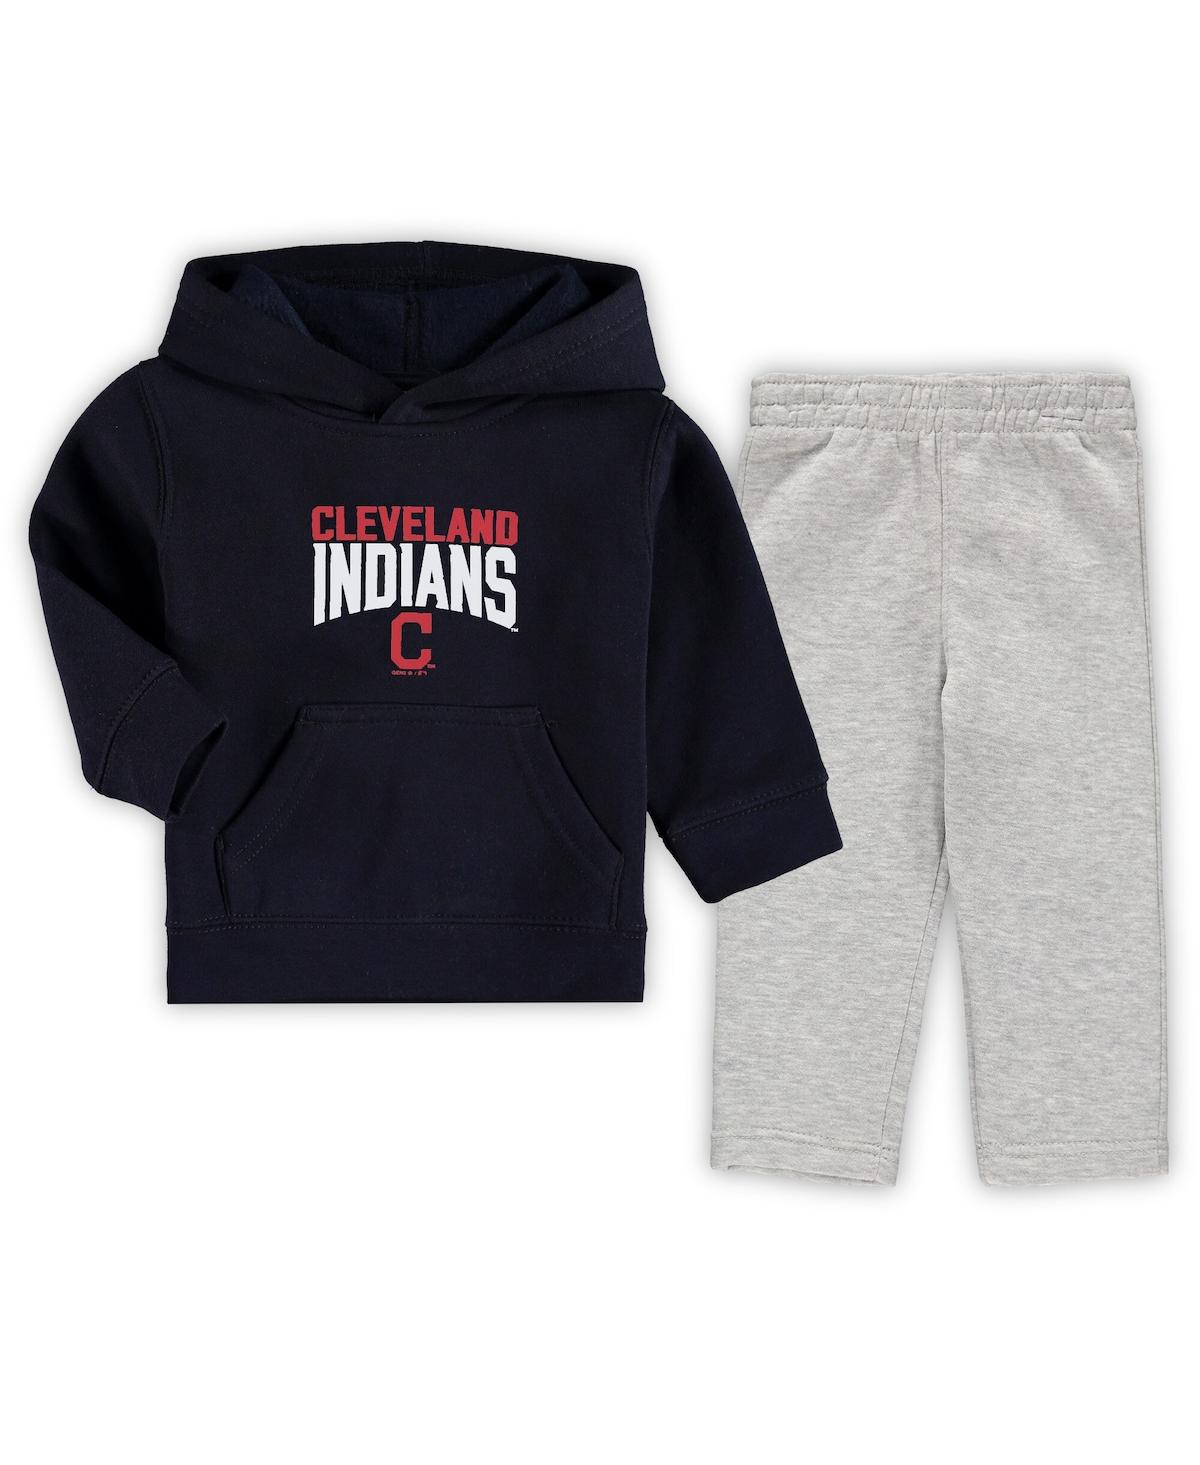 Outerstuff Kids' Toddler Boys Navy, Heathered Gray Cleveland Indians Fan Flare Fleece Hoodie And Pants Set In Navy,heathered Gray